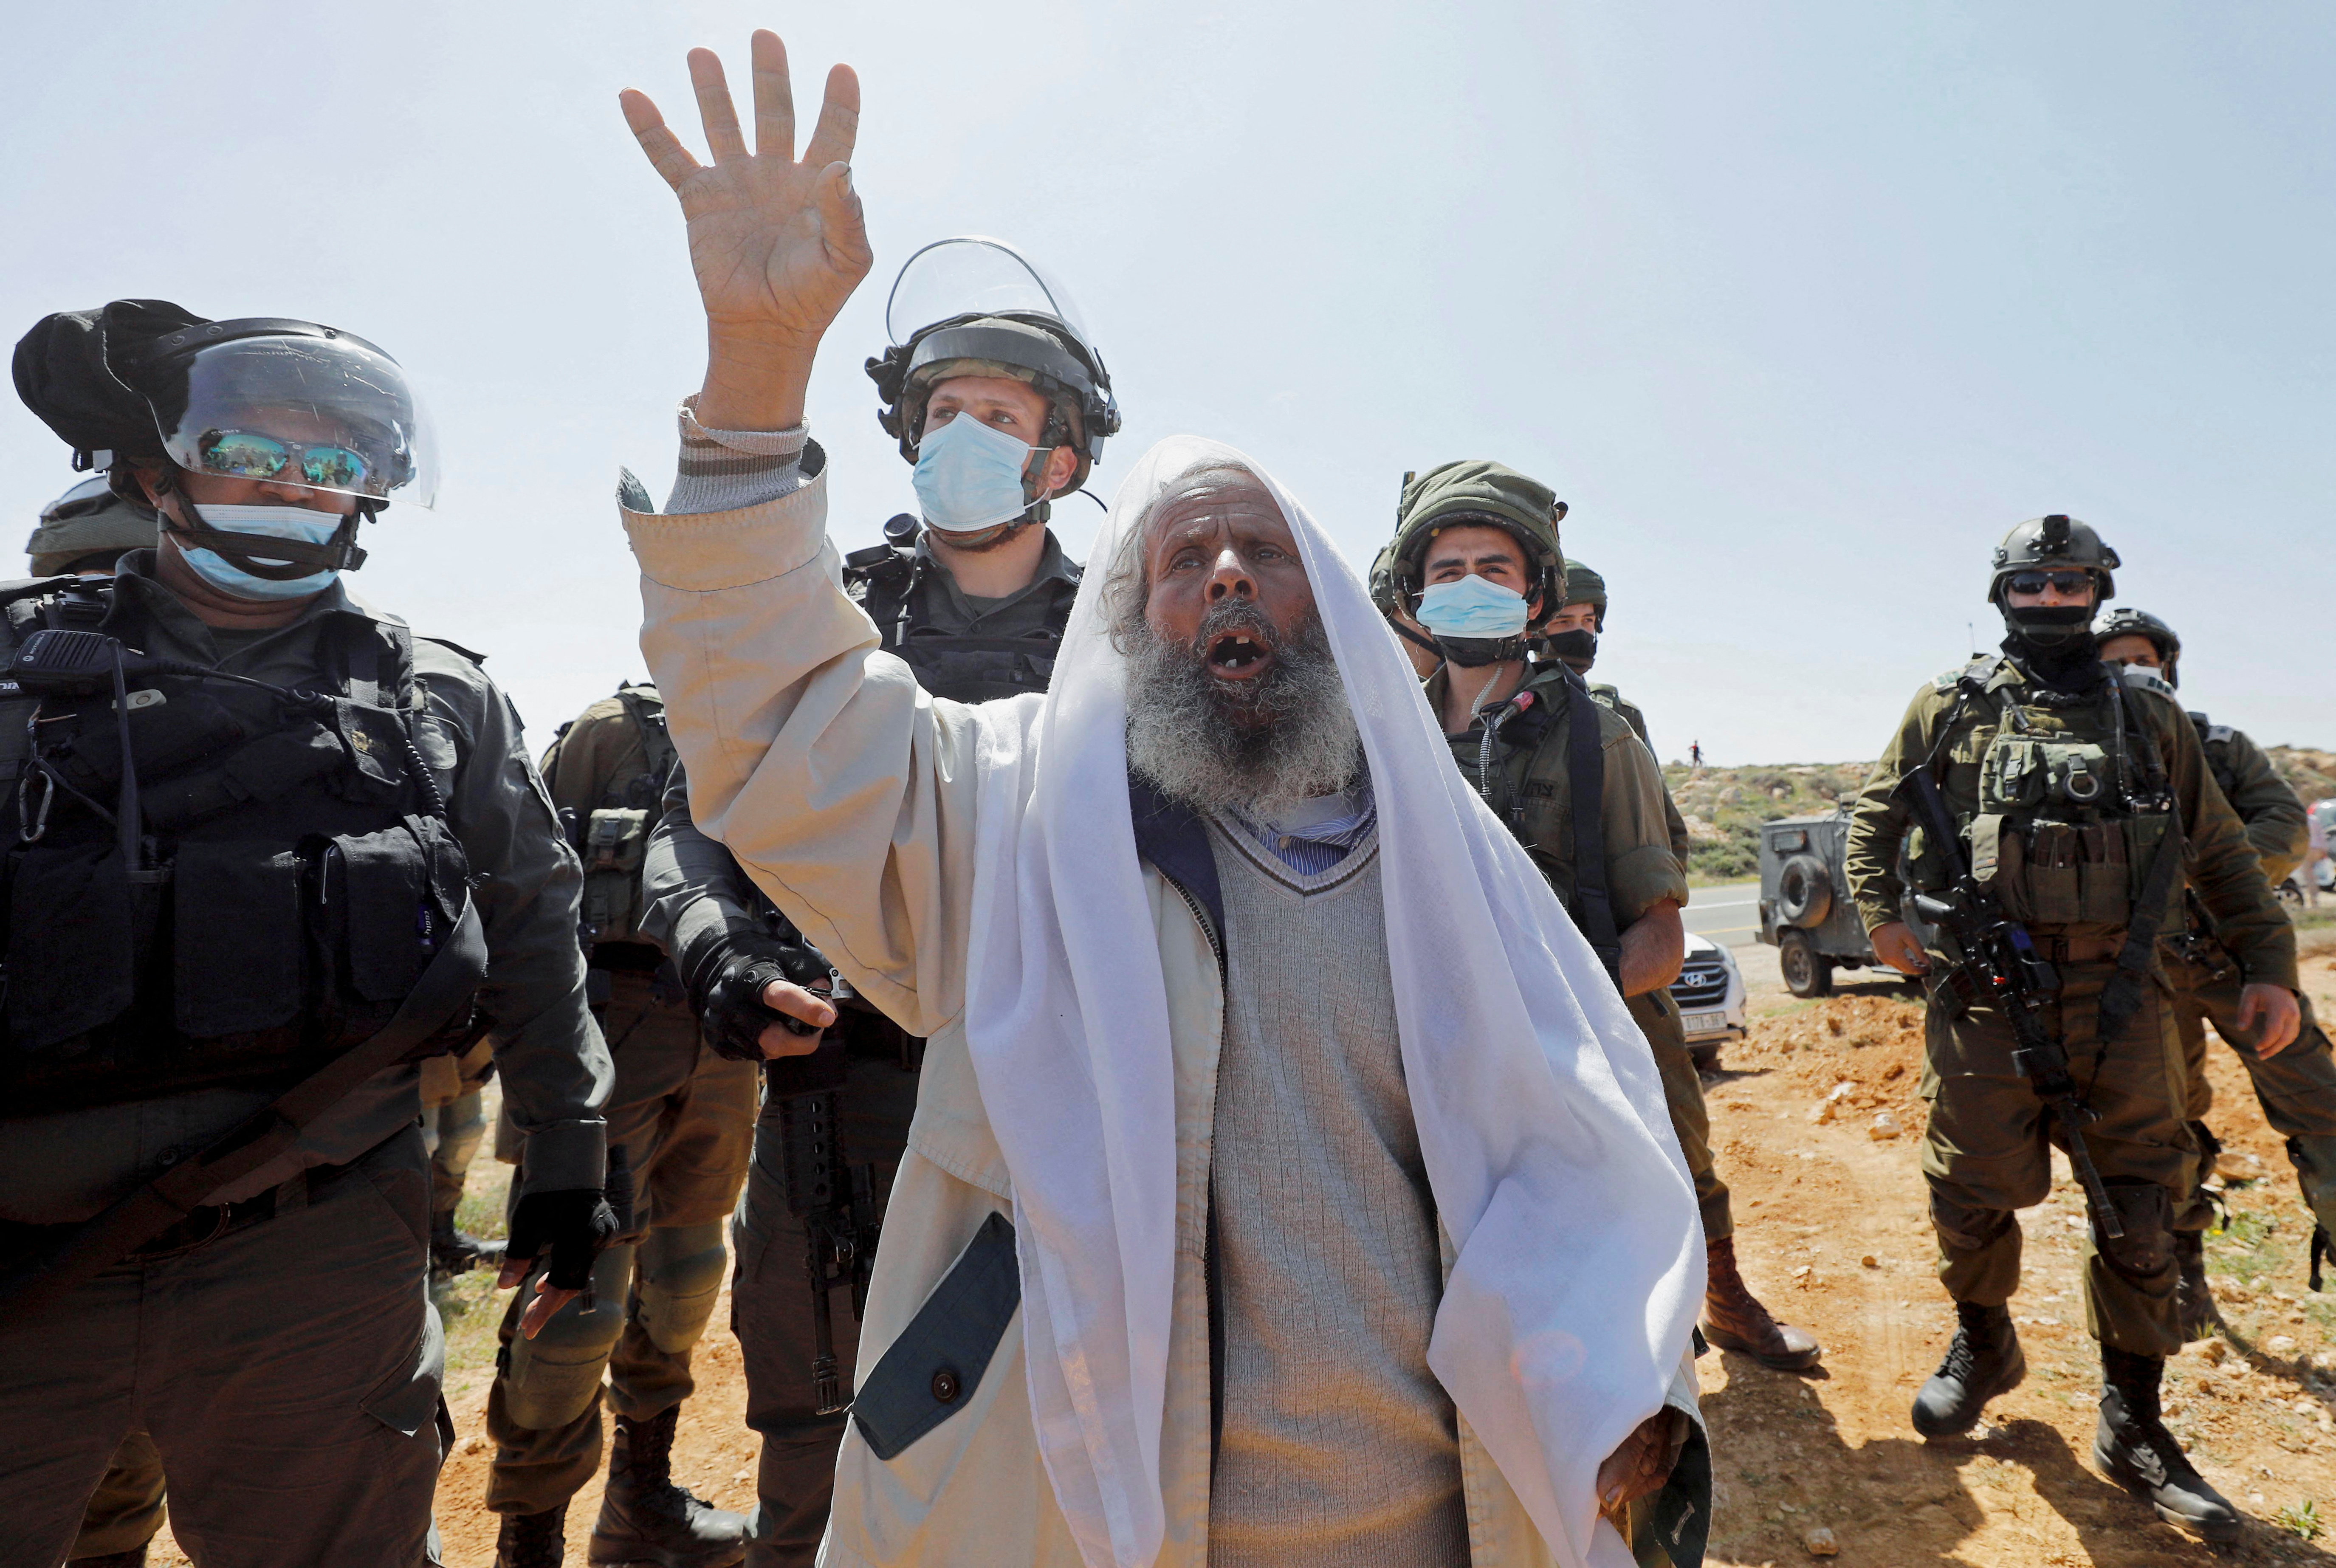 Israel army kills elderly man and are now pretending they helped him :  r/WitchesVsPatriarchy